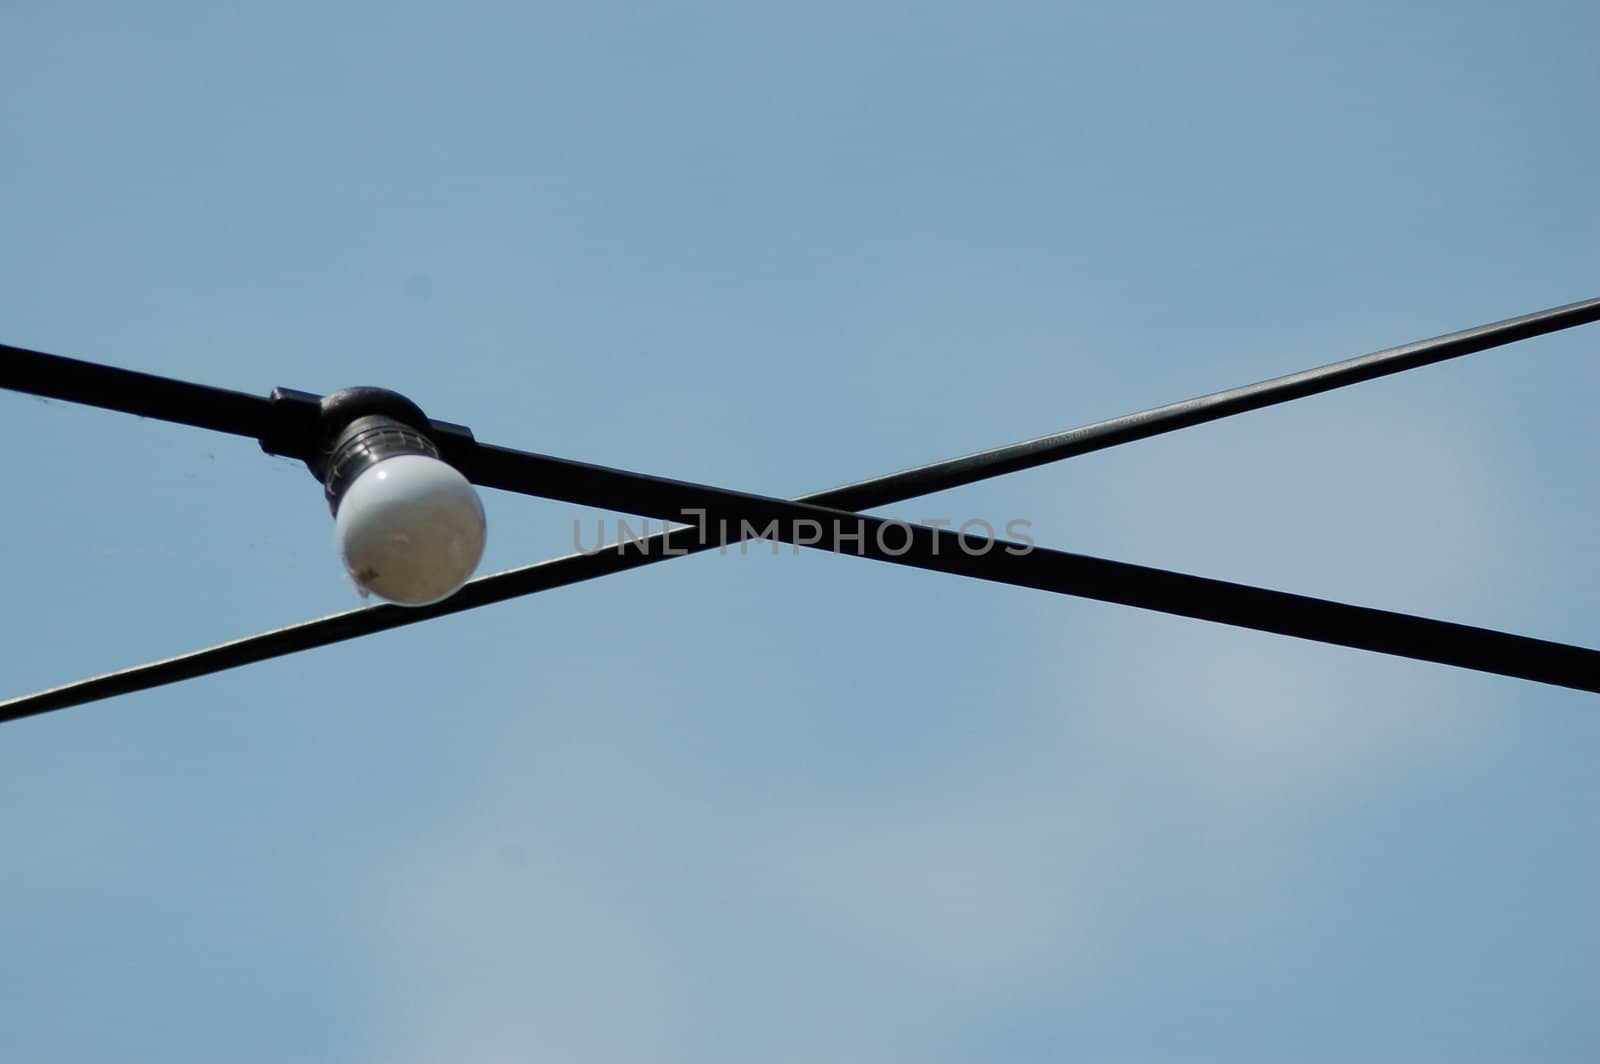 Power cables crossing against a blue sky, featuring one light bulb.